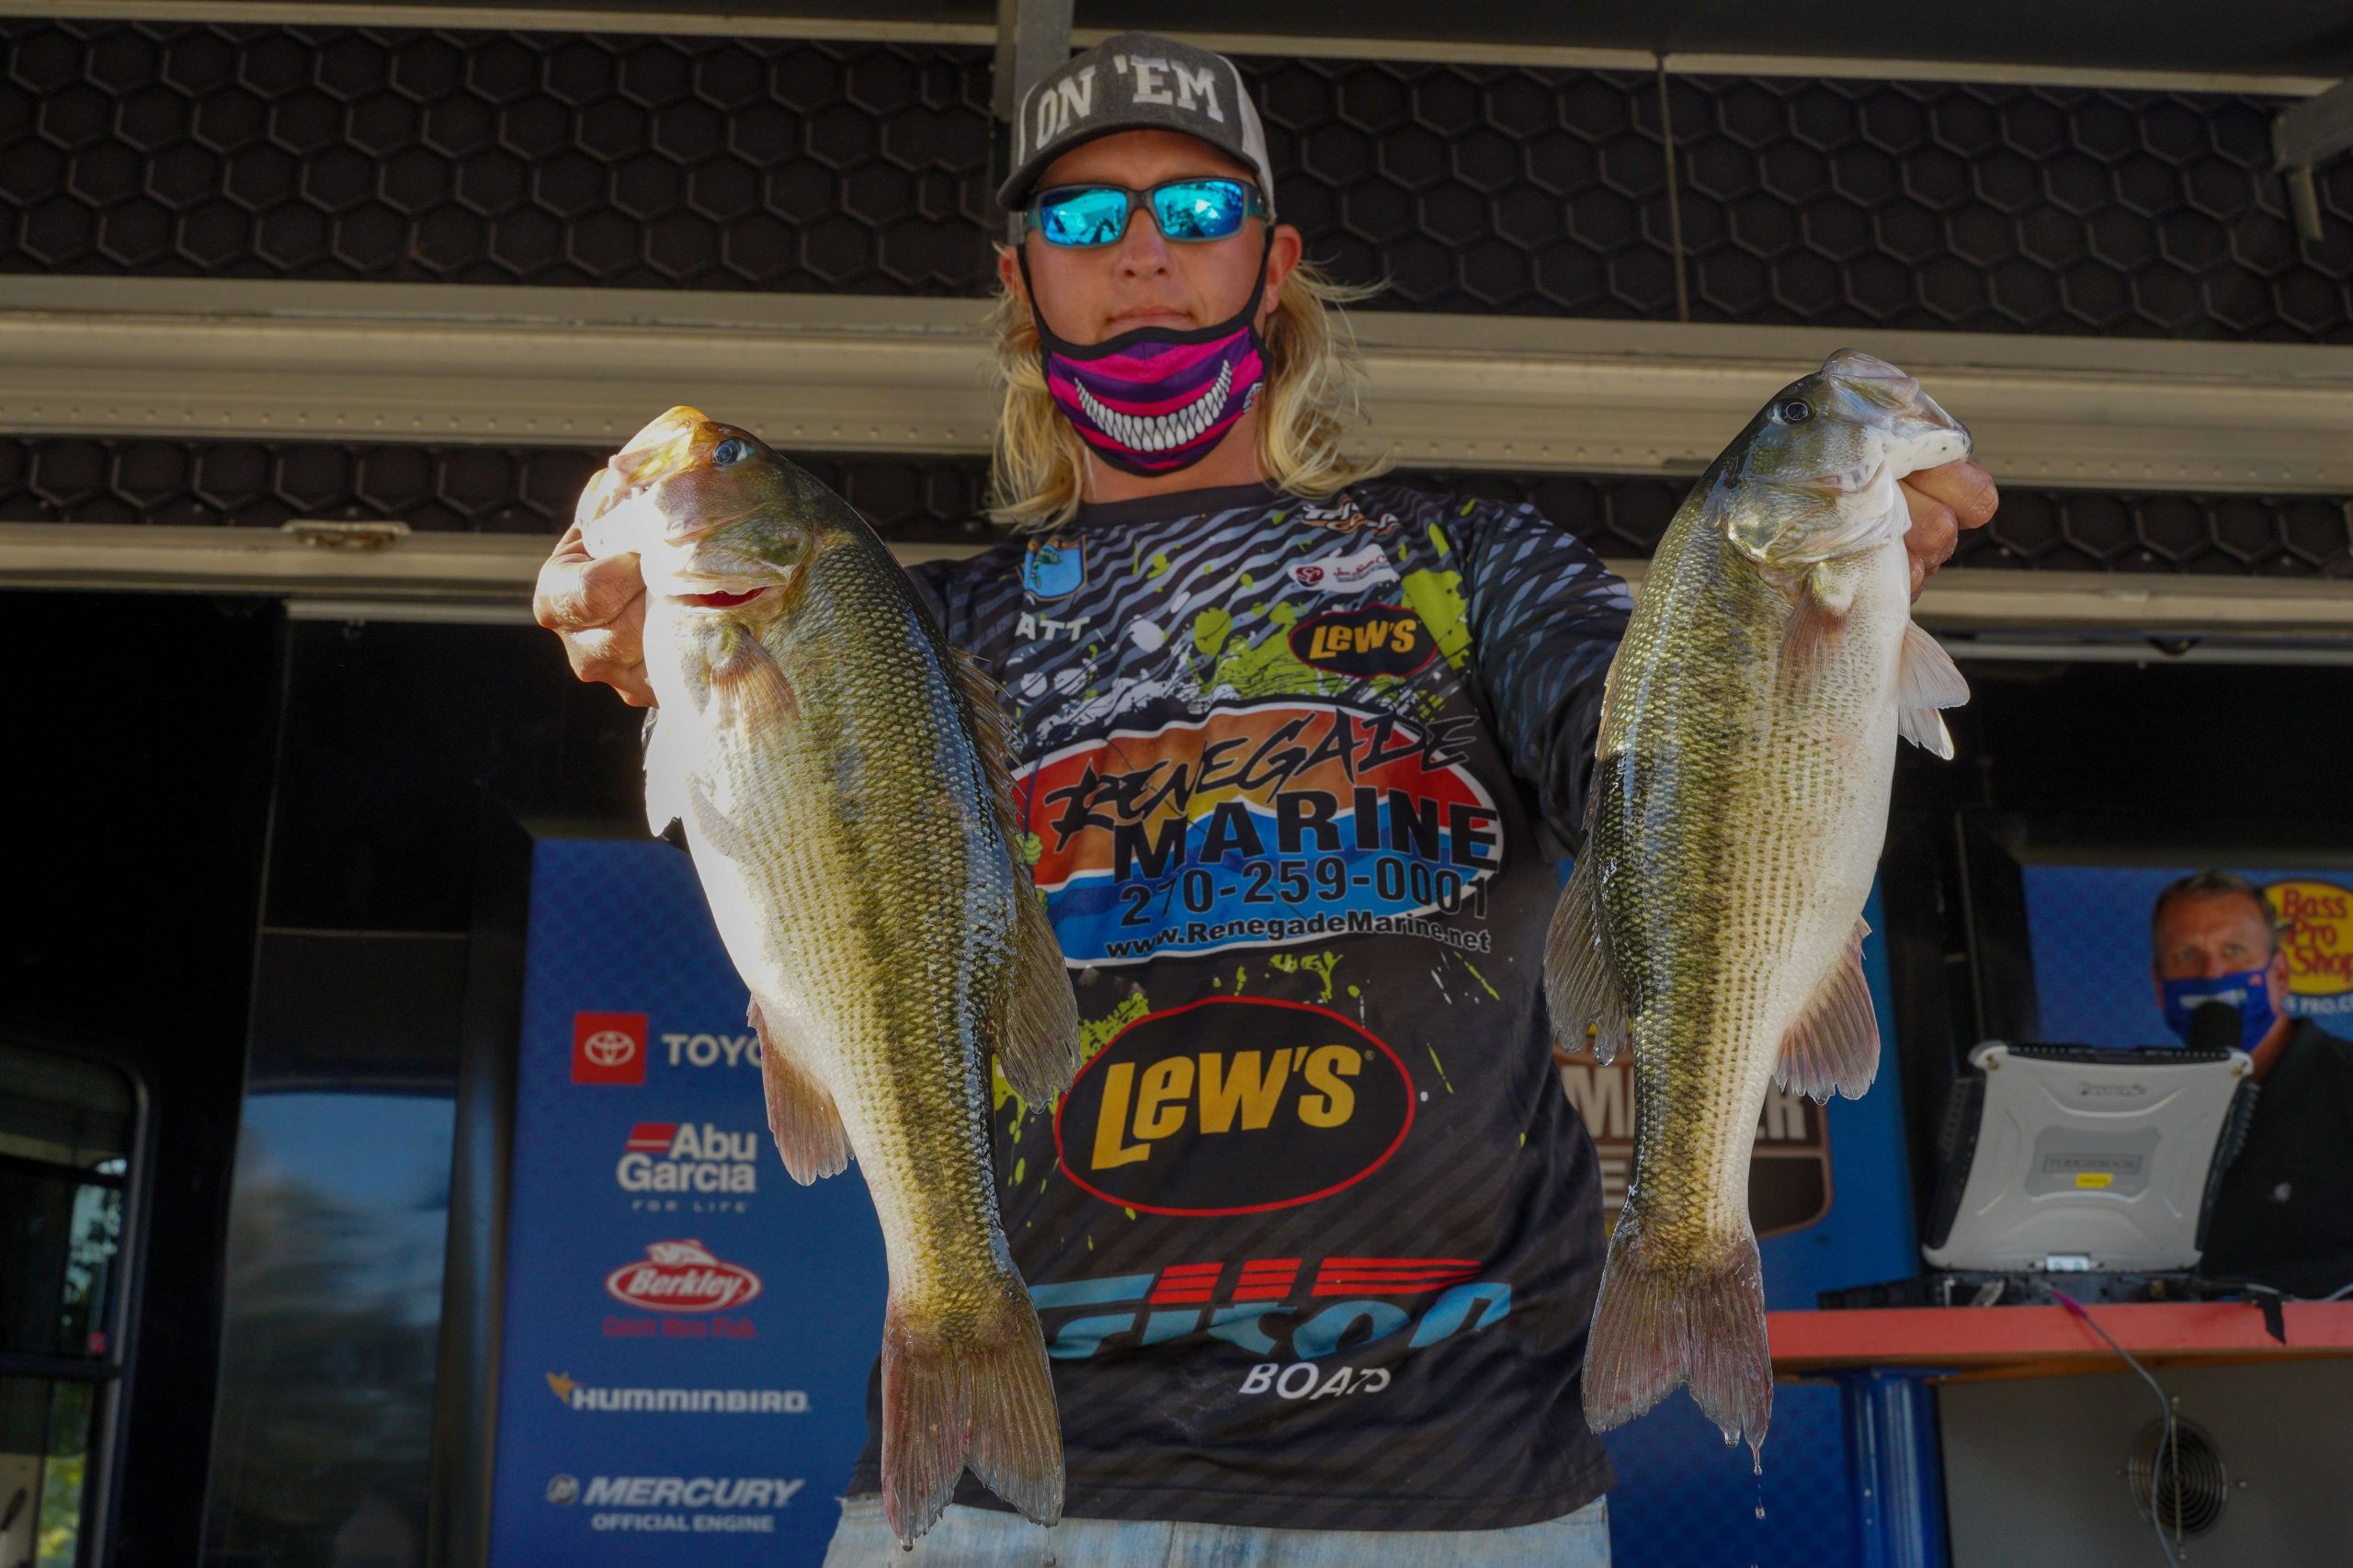 Several anglers have parlayed decent finishes at Neely Henry in 2020. Matt Robertson turned around his season with a second-place finish in the Open, and he went on to secure his second Classic berth with a victory at Cherokee. Robertson finished out strong in the Opens to take third overall in points and qualify to fish the Elites, where he is second in the Rookie of the Year standings.